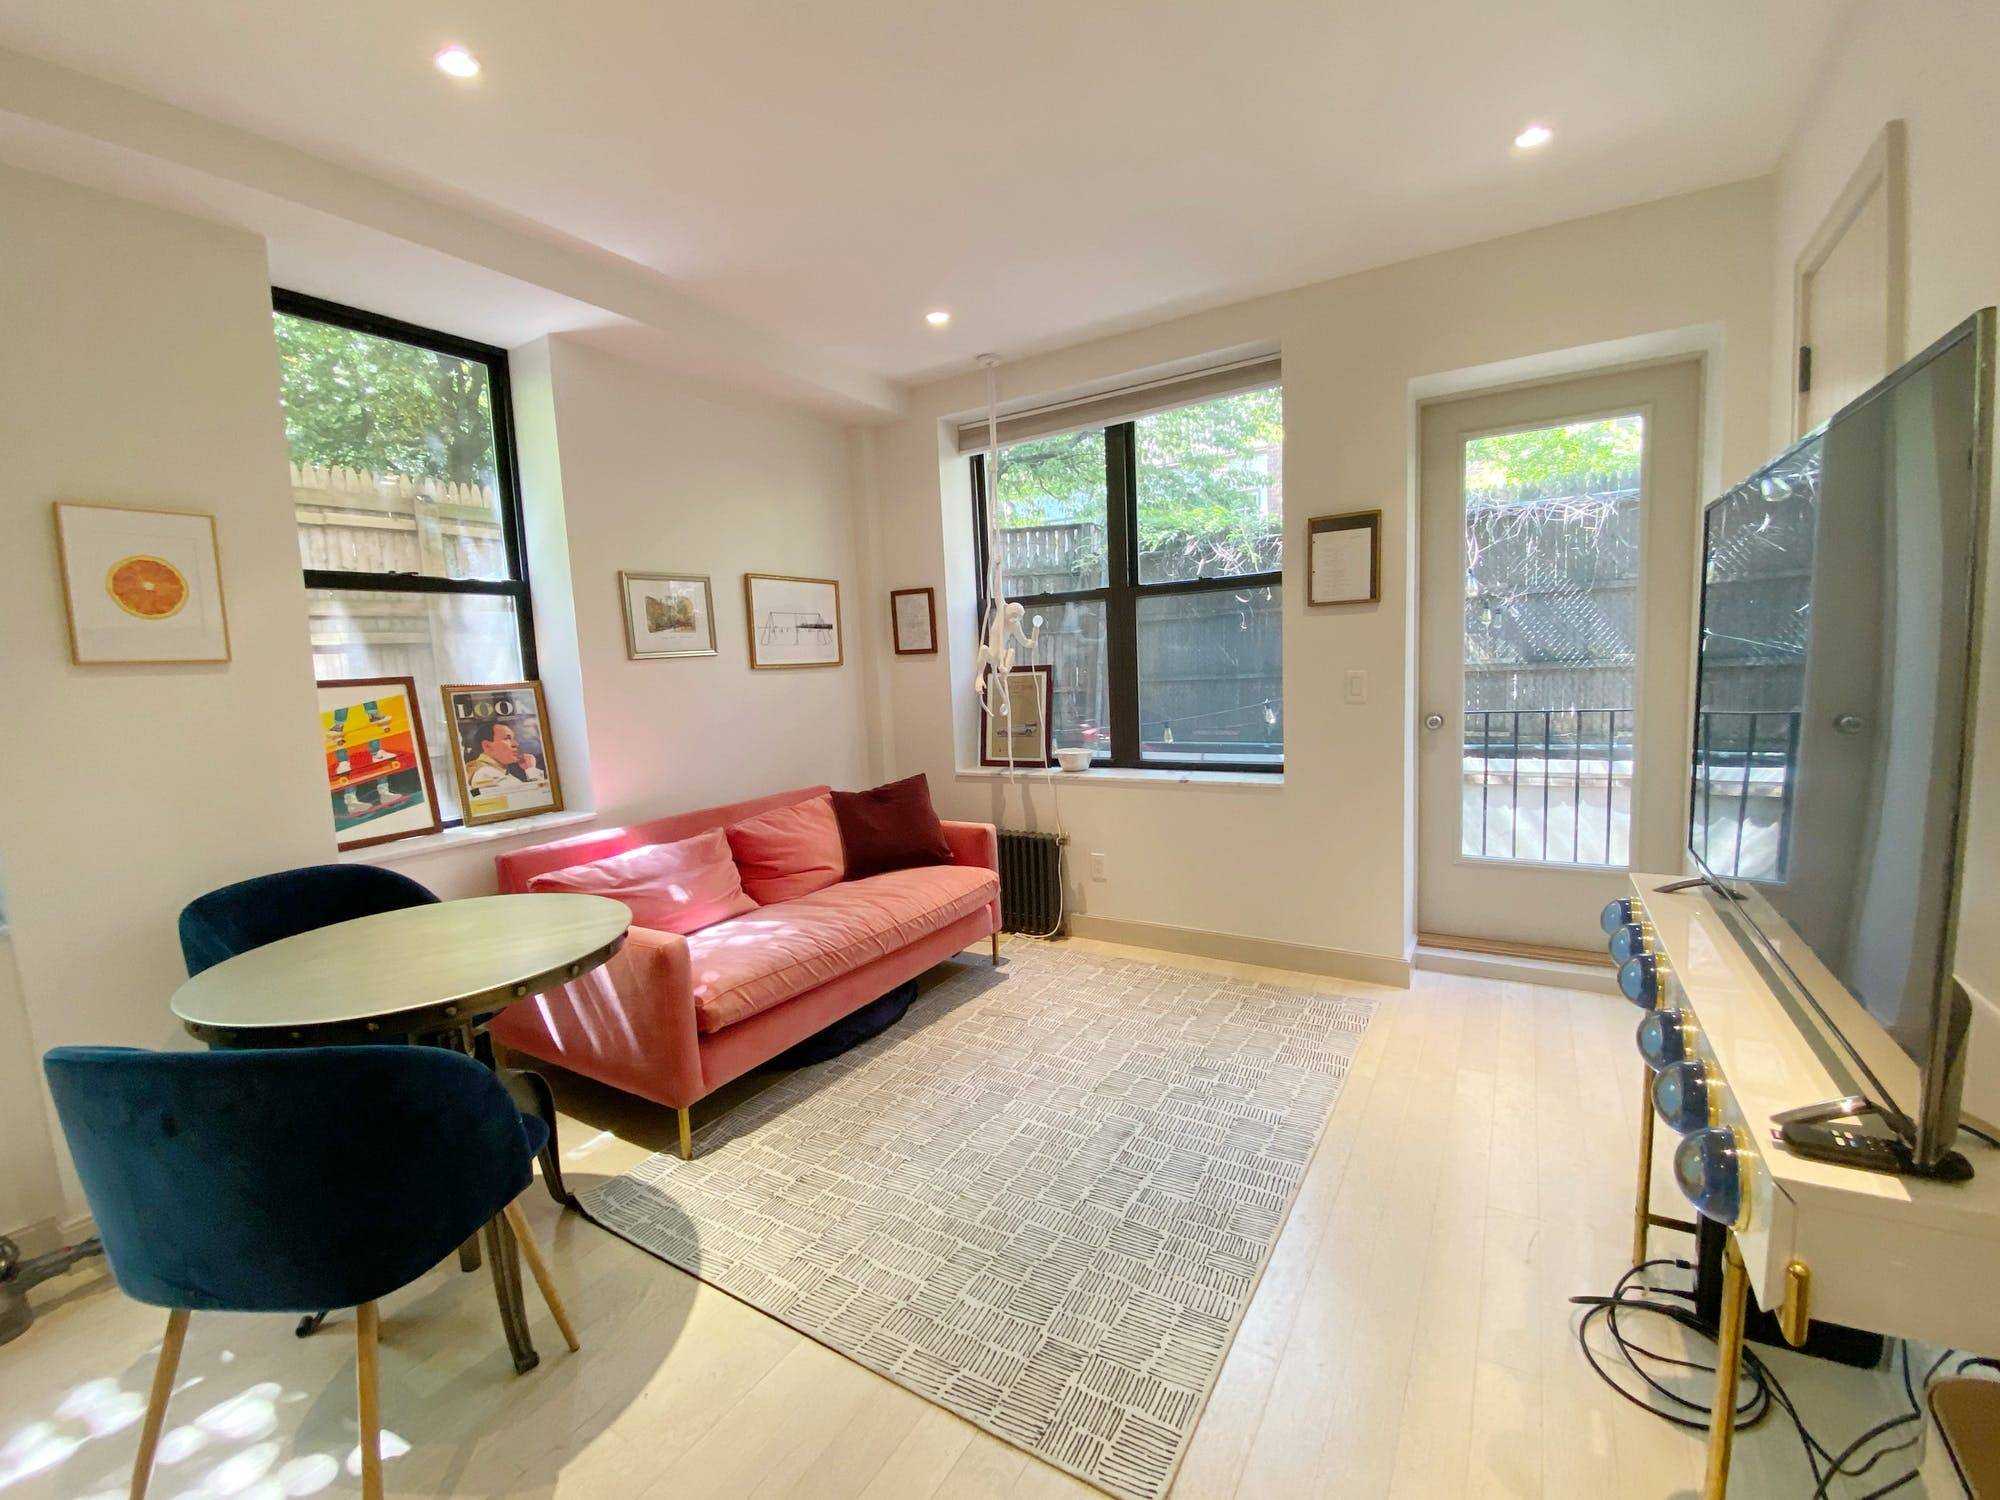 PRIVATE PATIO ! Gorgeous One Bedroom Home Office Alcove in the Heart of Greenwich Village Video Tours below copy amp ; paste link to browser 1RE https youtu.